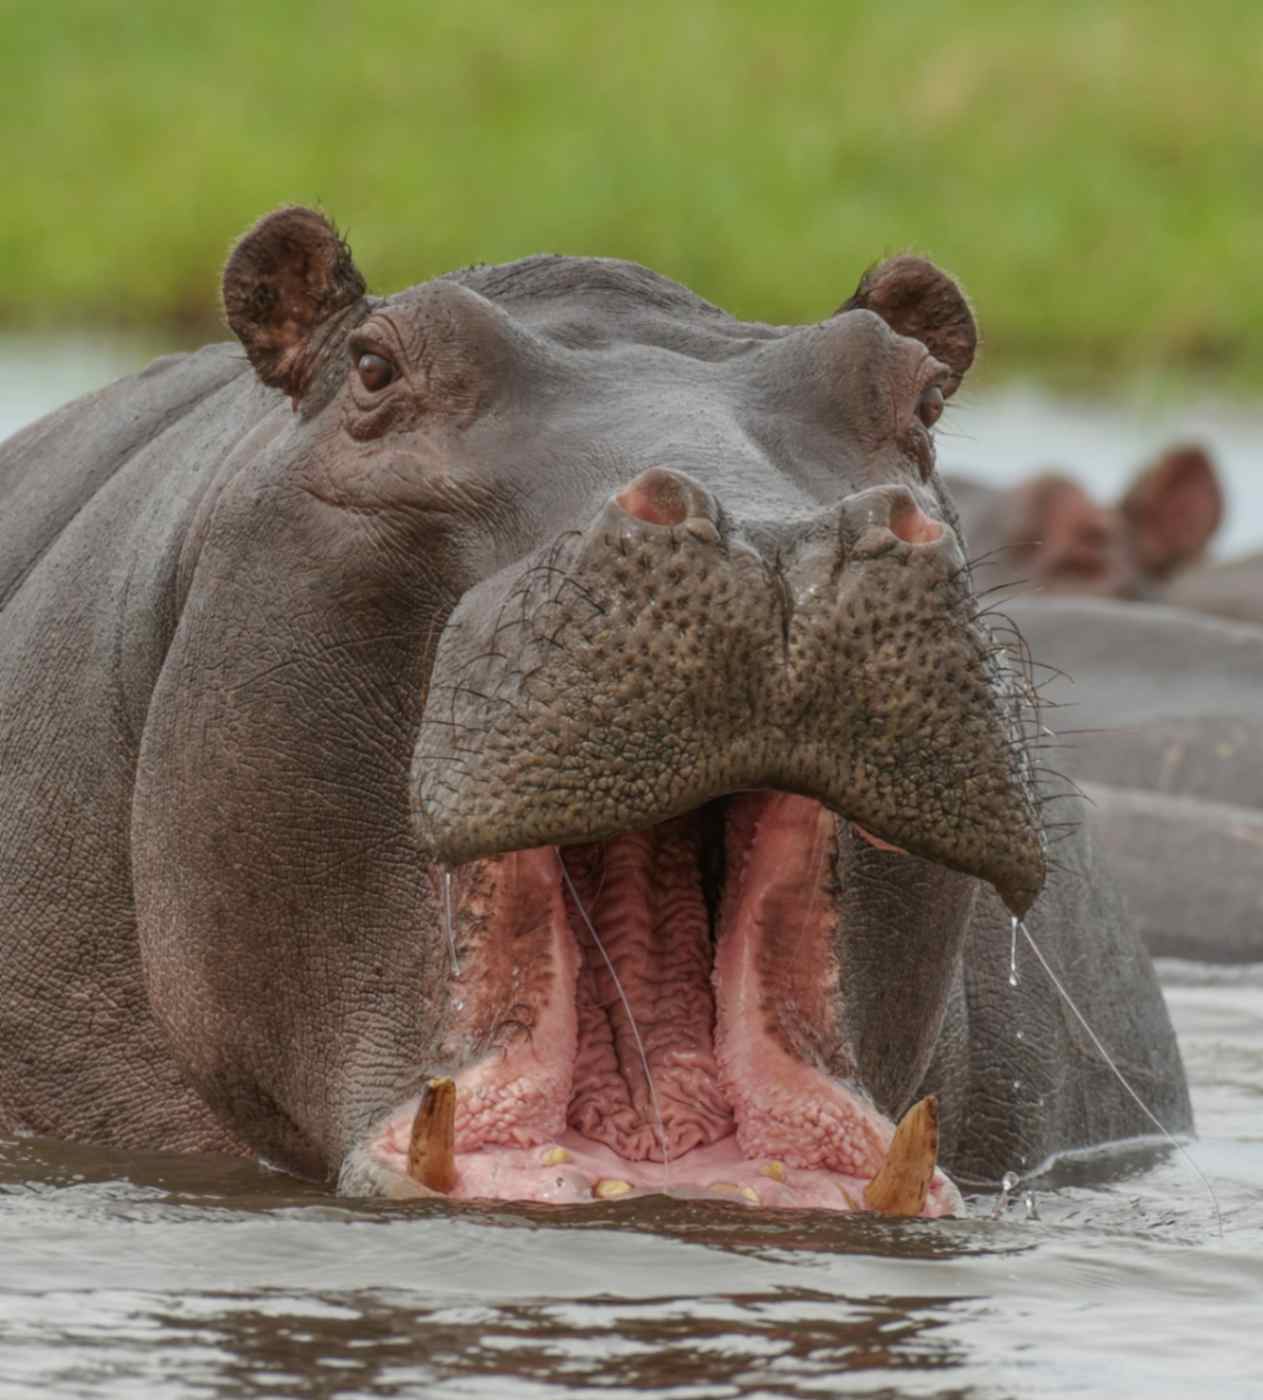 hippo has maasive teeeth, which are used for territorial fight and to defense against predators at chobe national park
